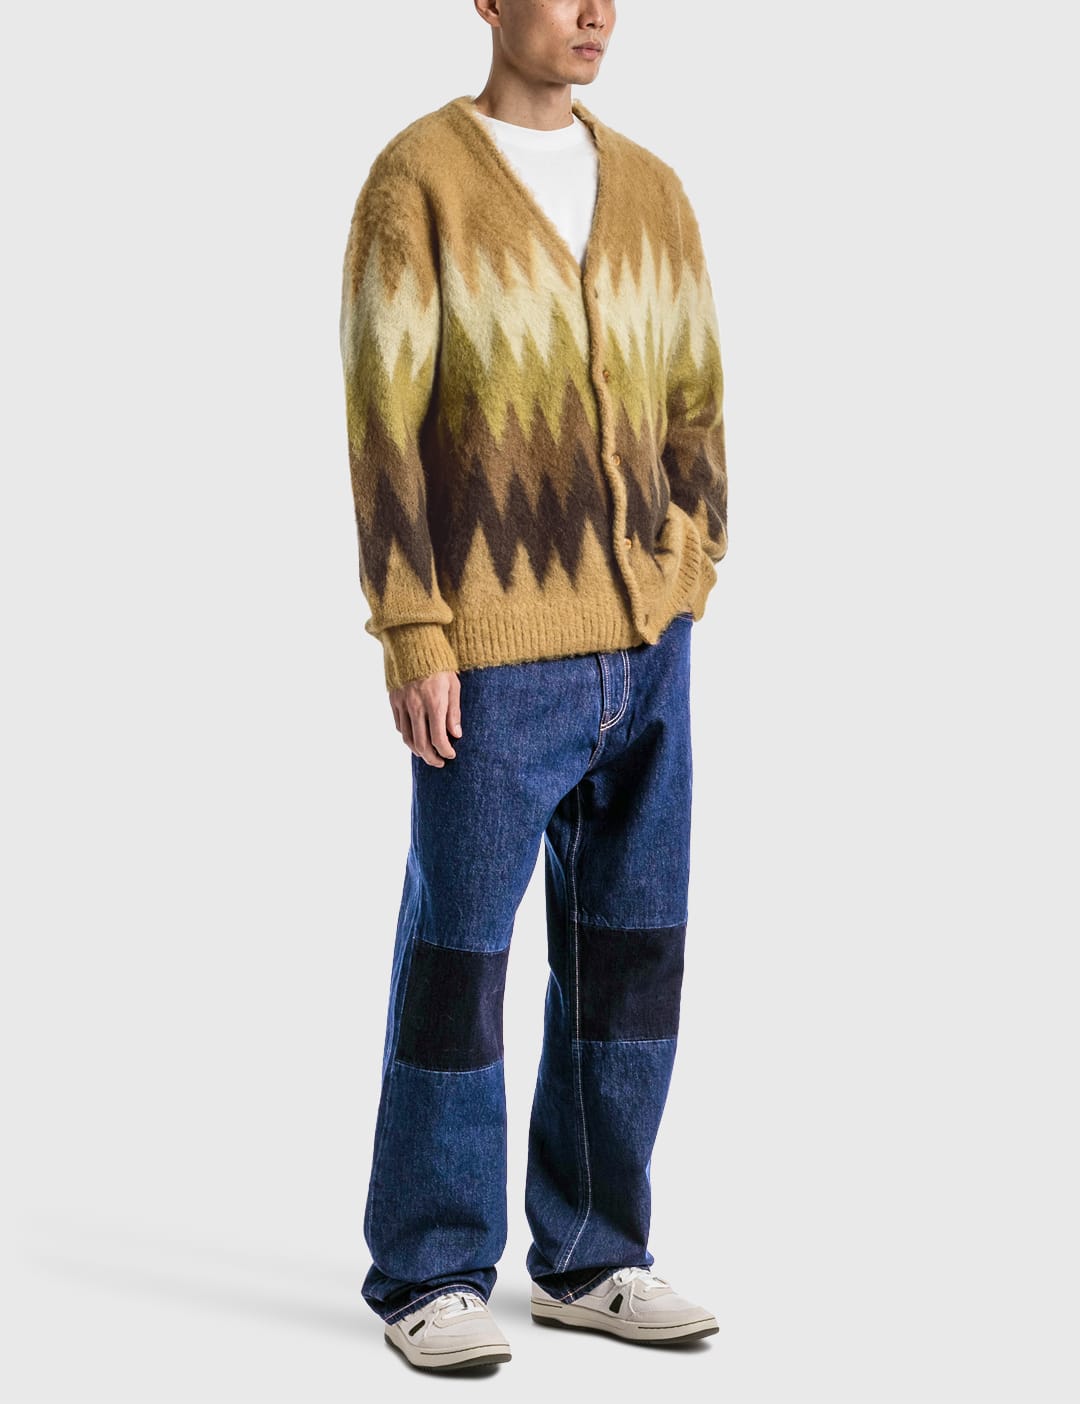 Needles - Mohair Cardigan | HBX - Globally Curated Fashion and